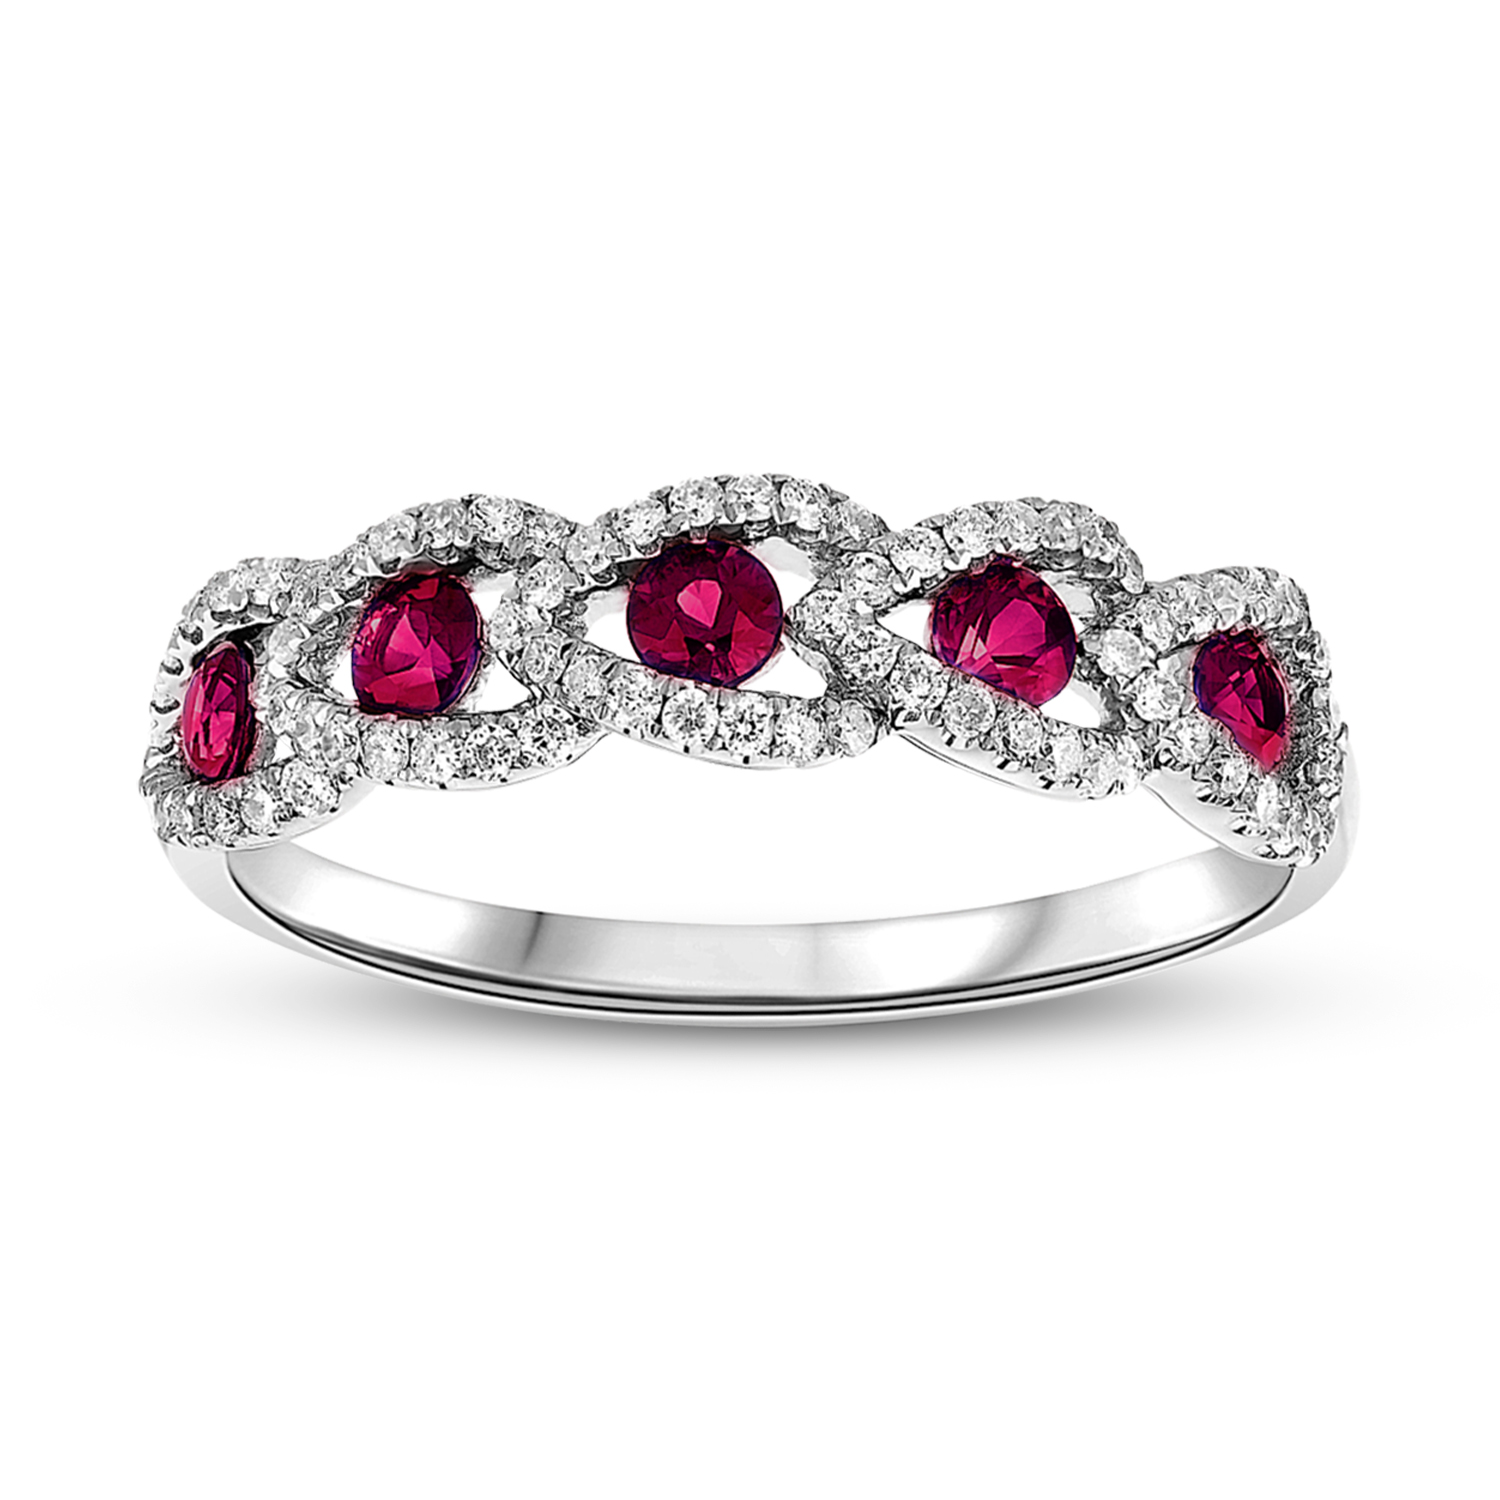 0.70ctw Diamond and Ruby Wedding Band in 18k Gold